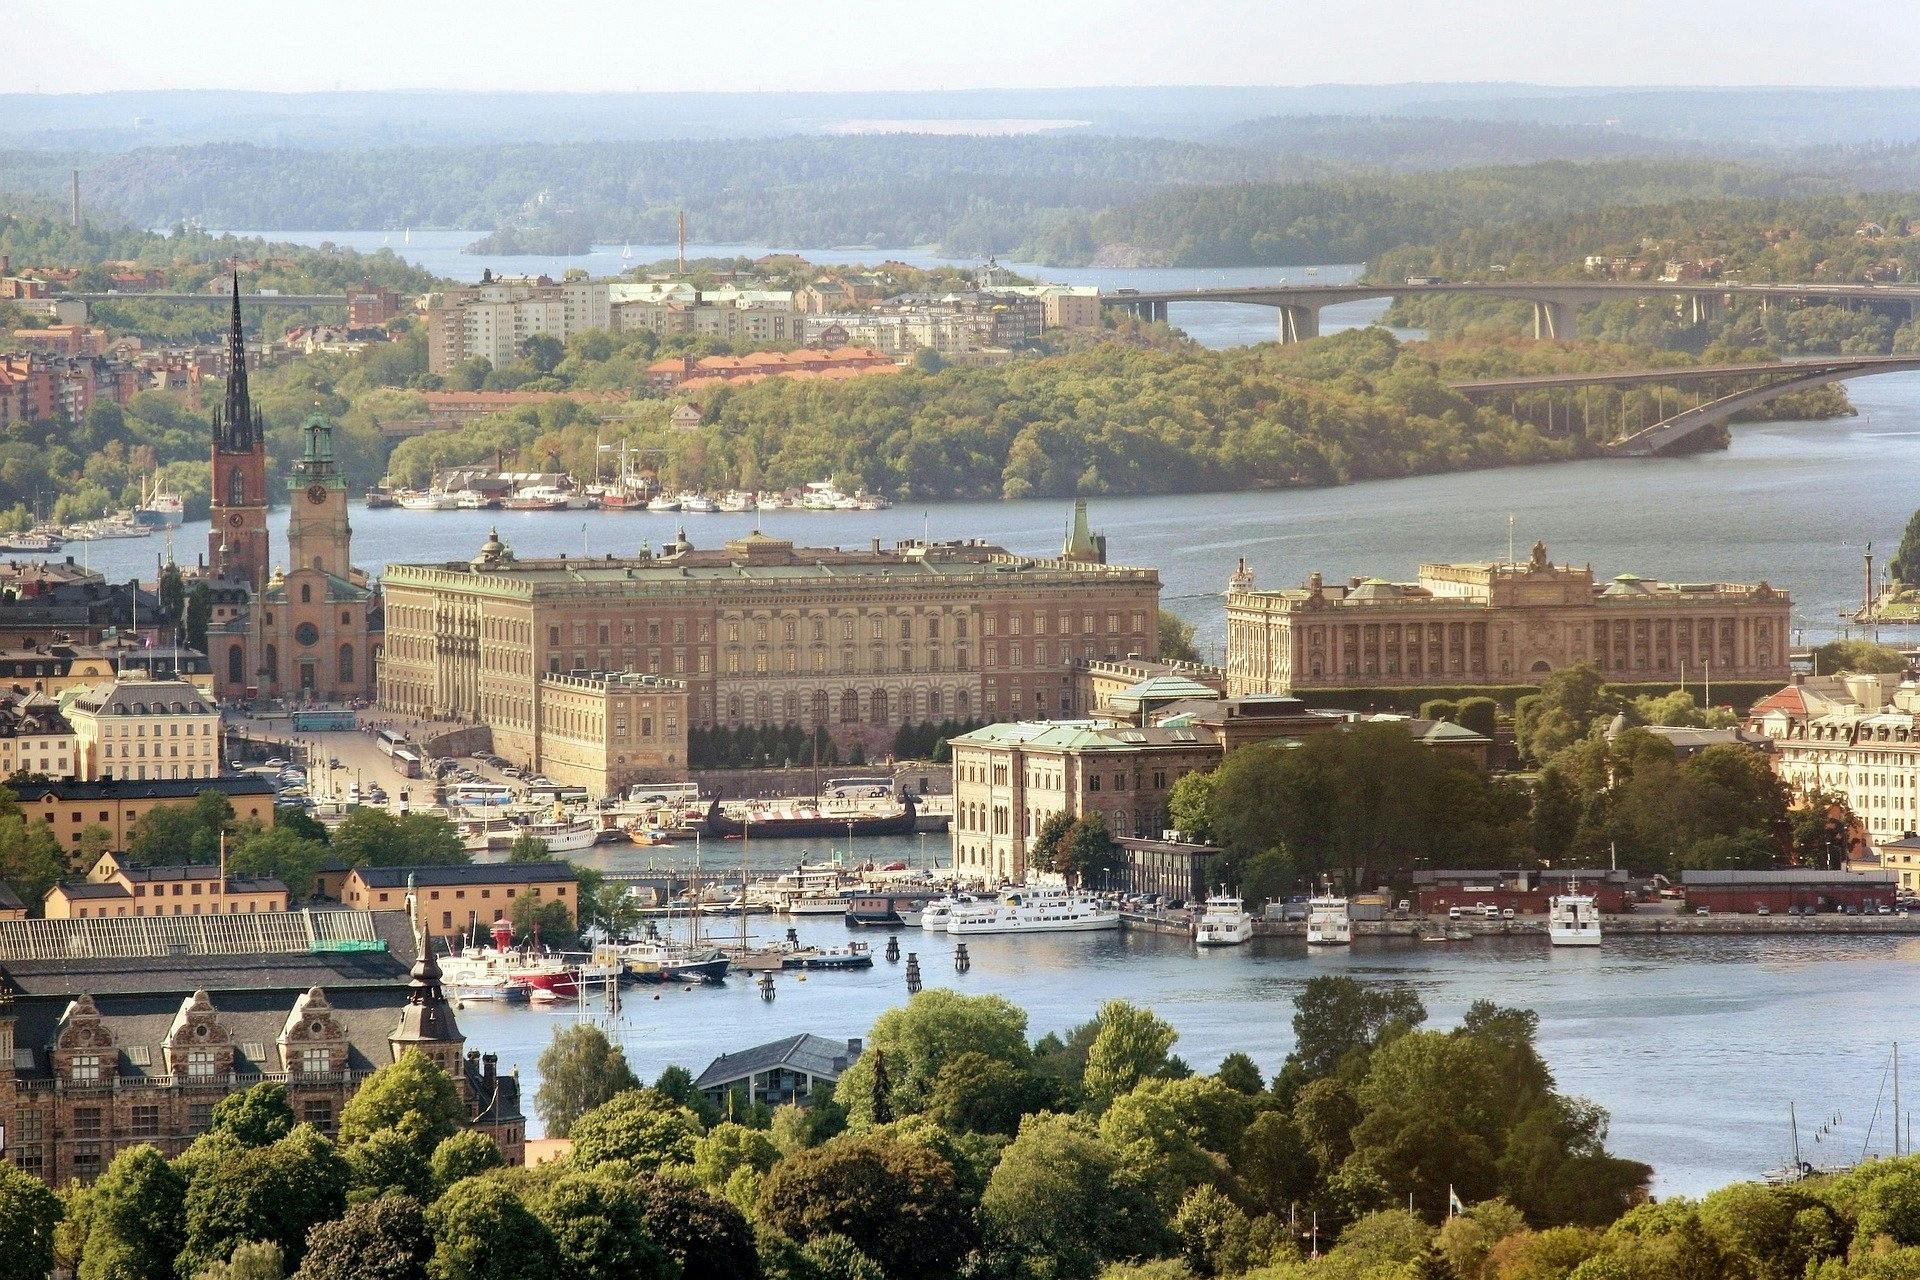 Murder mystery self-guided experience by Stockholm's Royal Palace